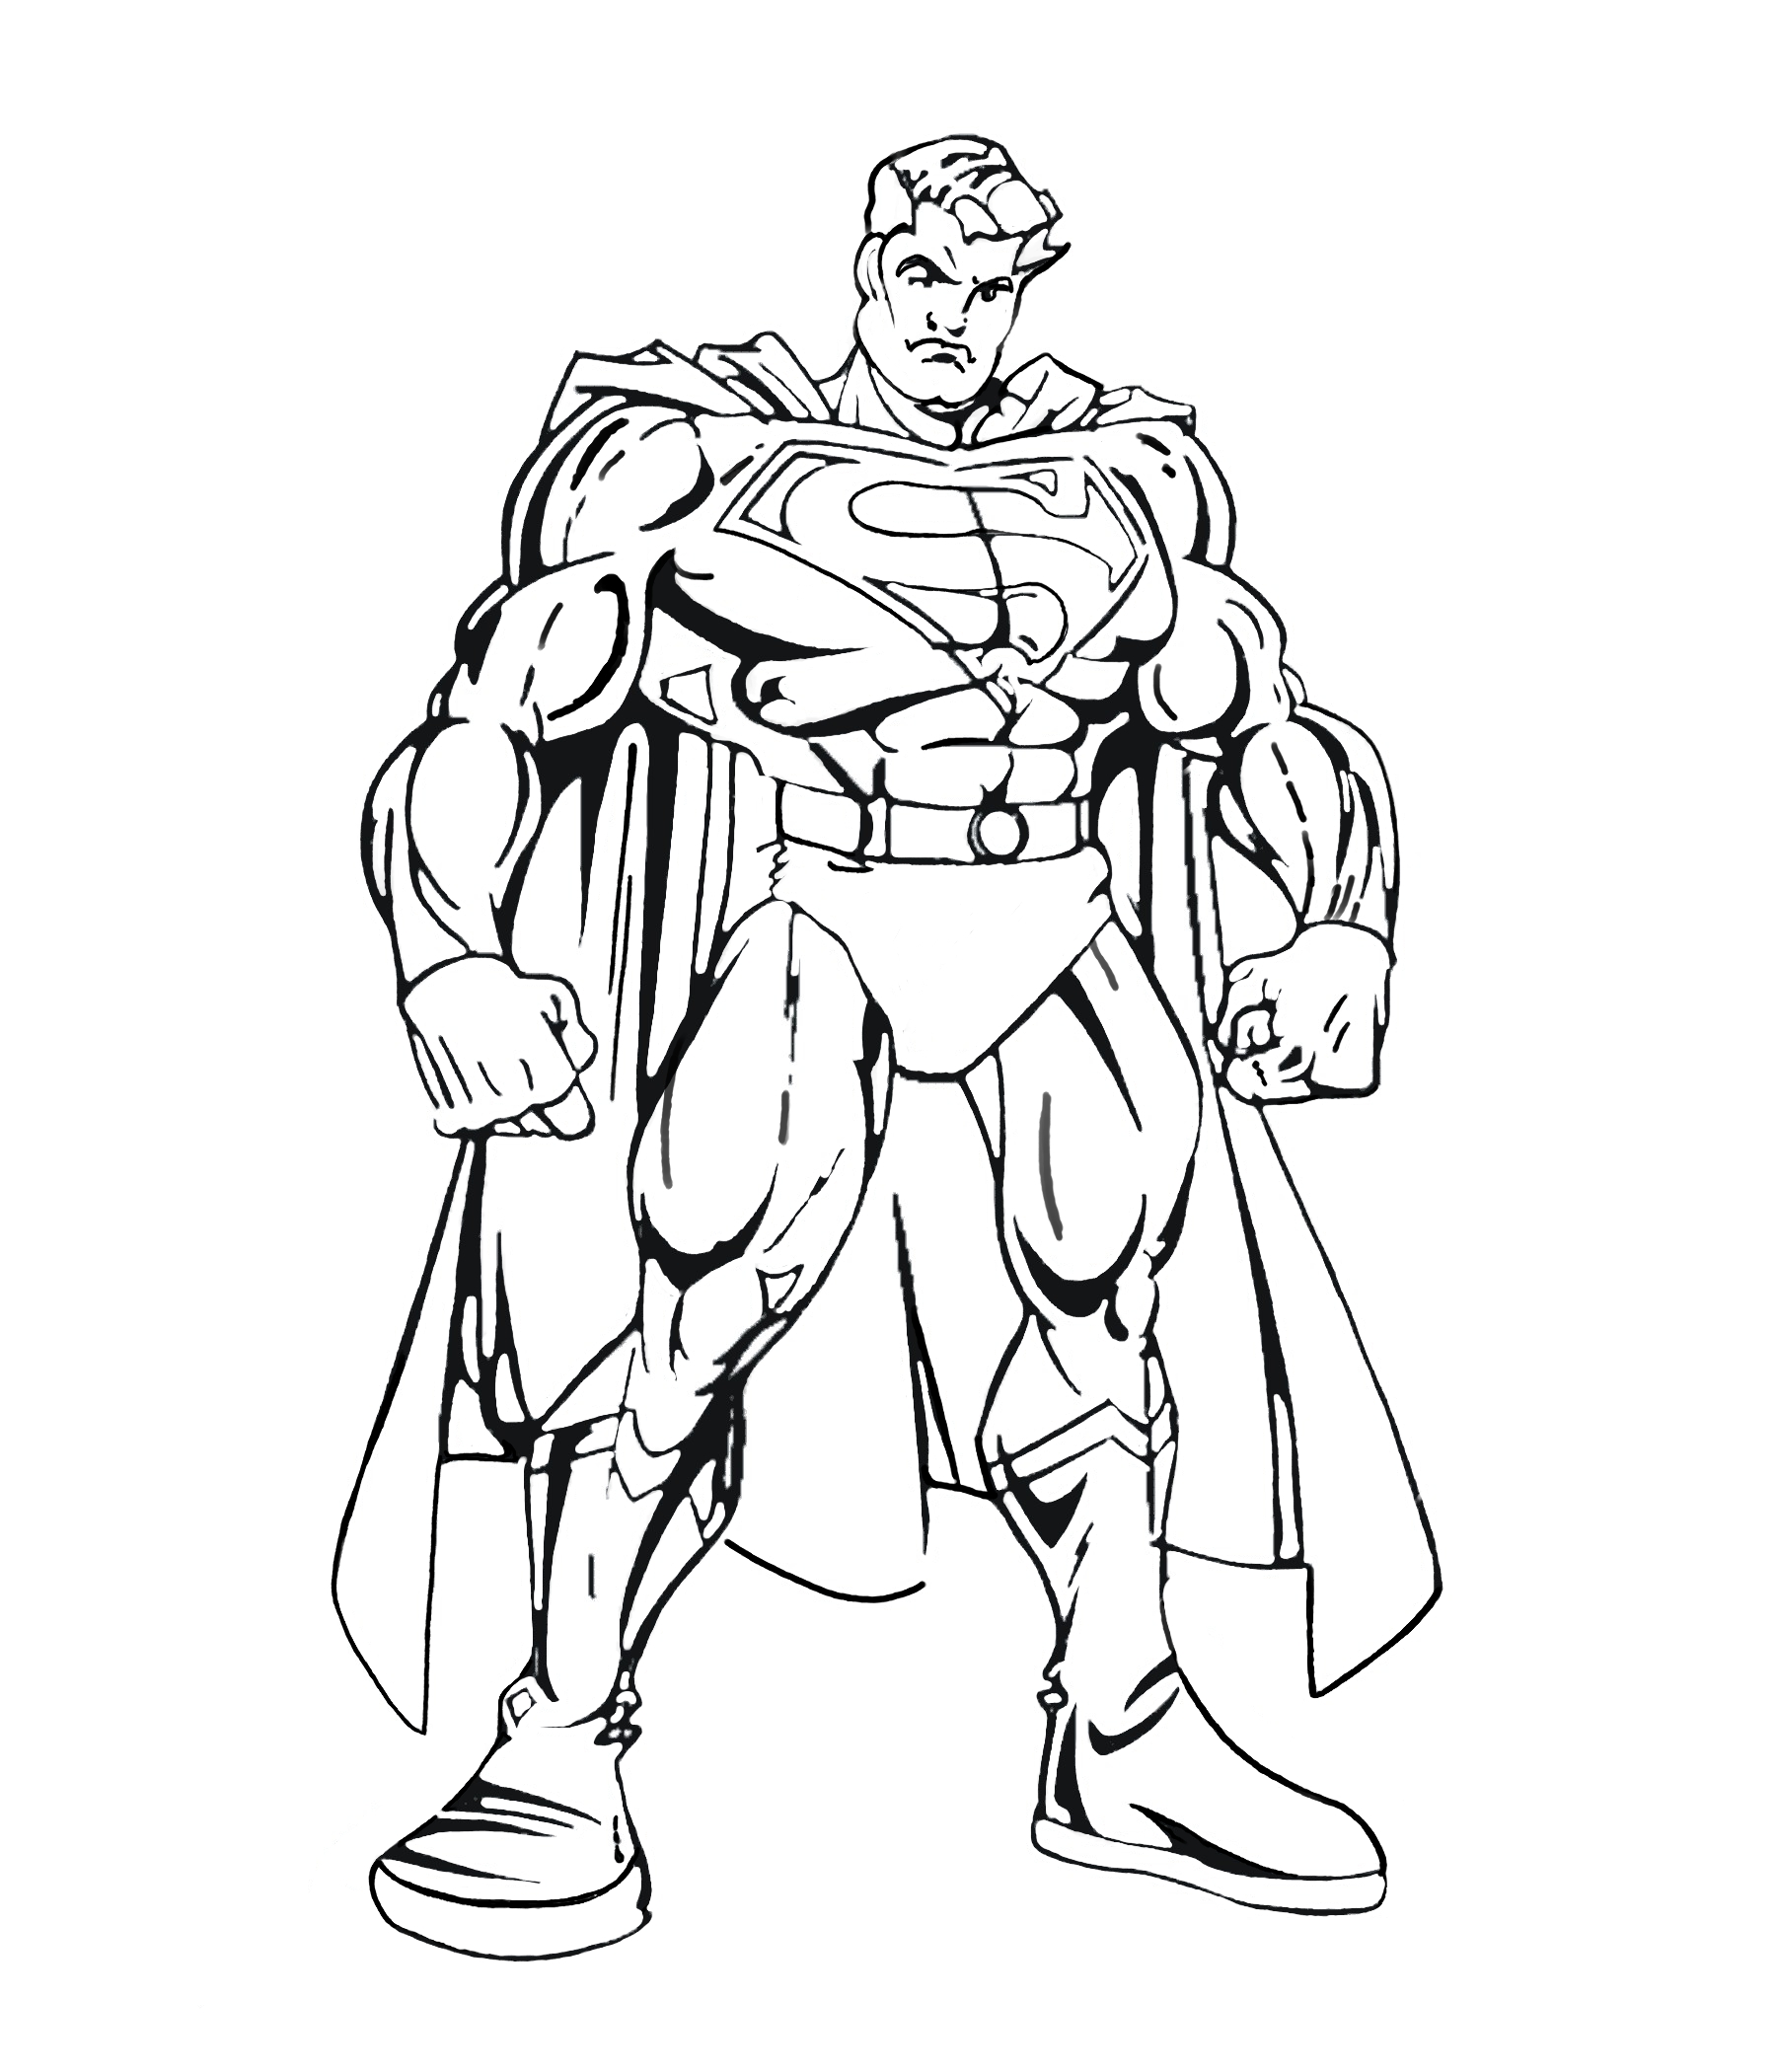 Superman coloring pages for kids - Superman Kids Coloring Pages